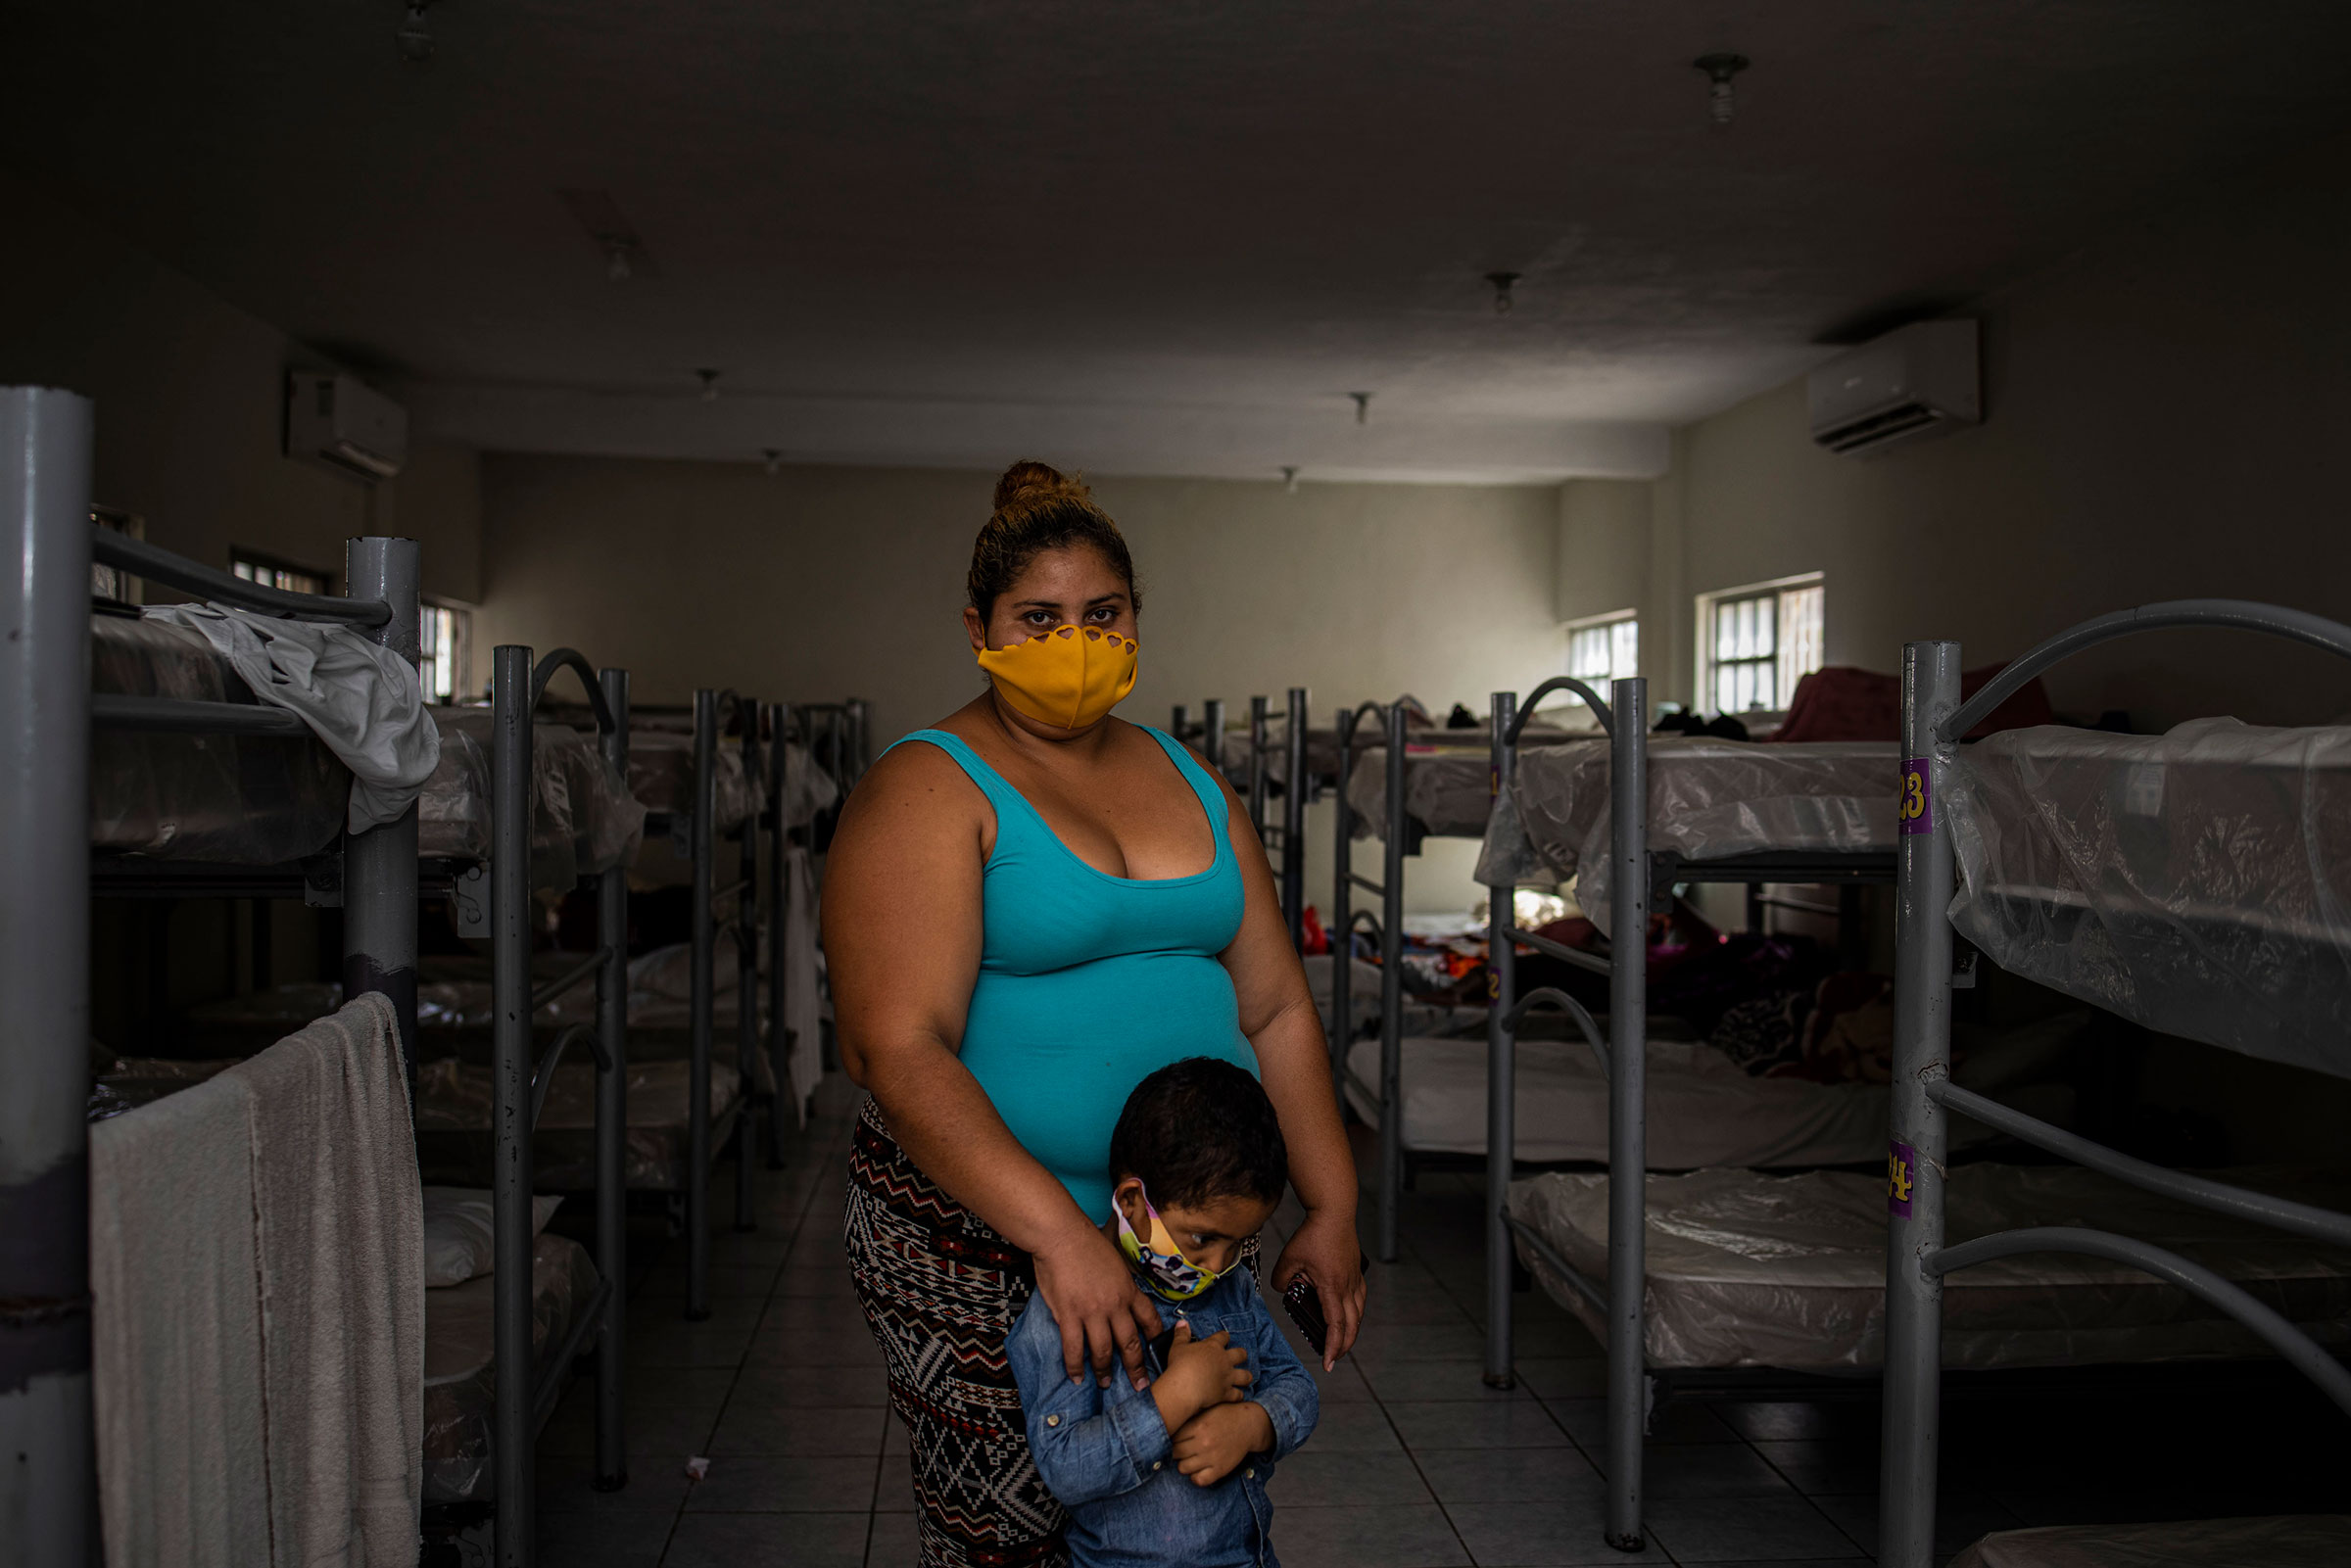 Cyndy Caceres, 28, and her four-year-old son pose for a portrait on May 4, 2021 in Reynosa in the Mexican state of Tamaulipas, a city across the border from McAllen, Texas, that has seen thousands of migrants arrive hoping to claim asylum in the U.S. (Yael Martinez—Magnum Photos for TIME)